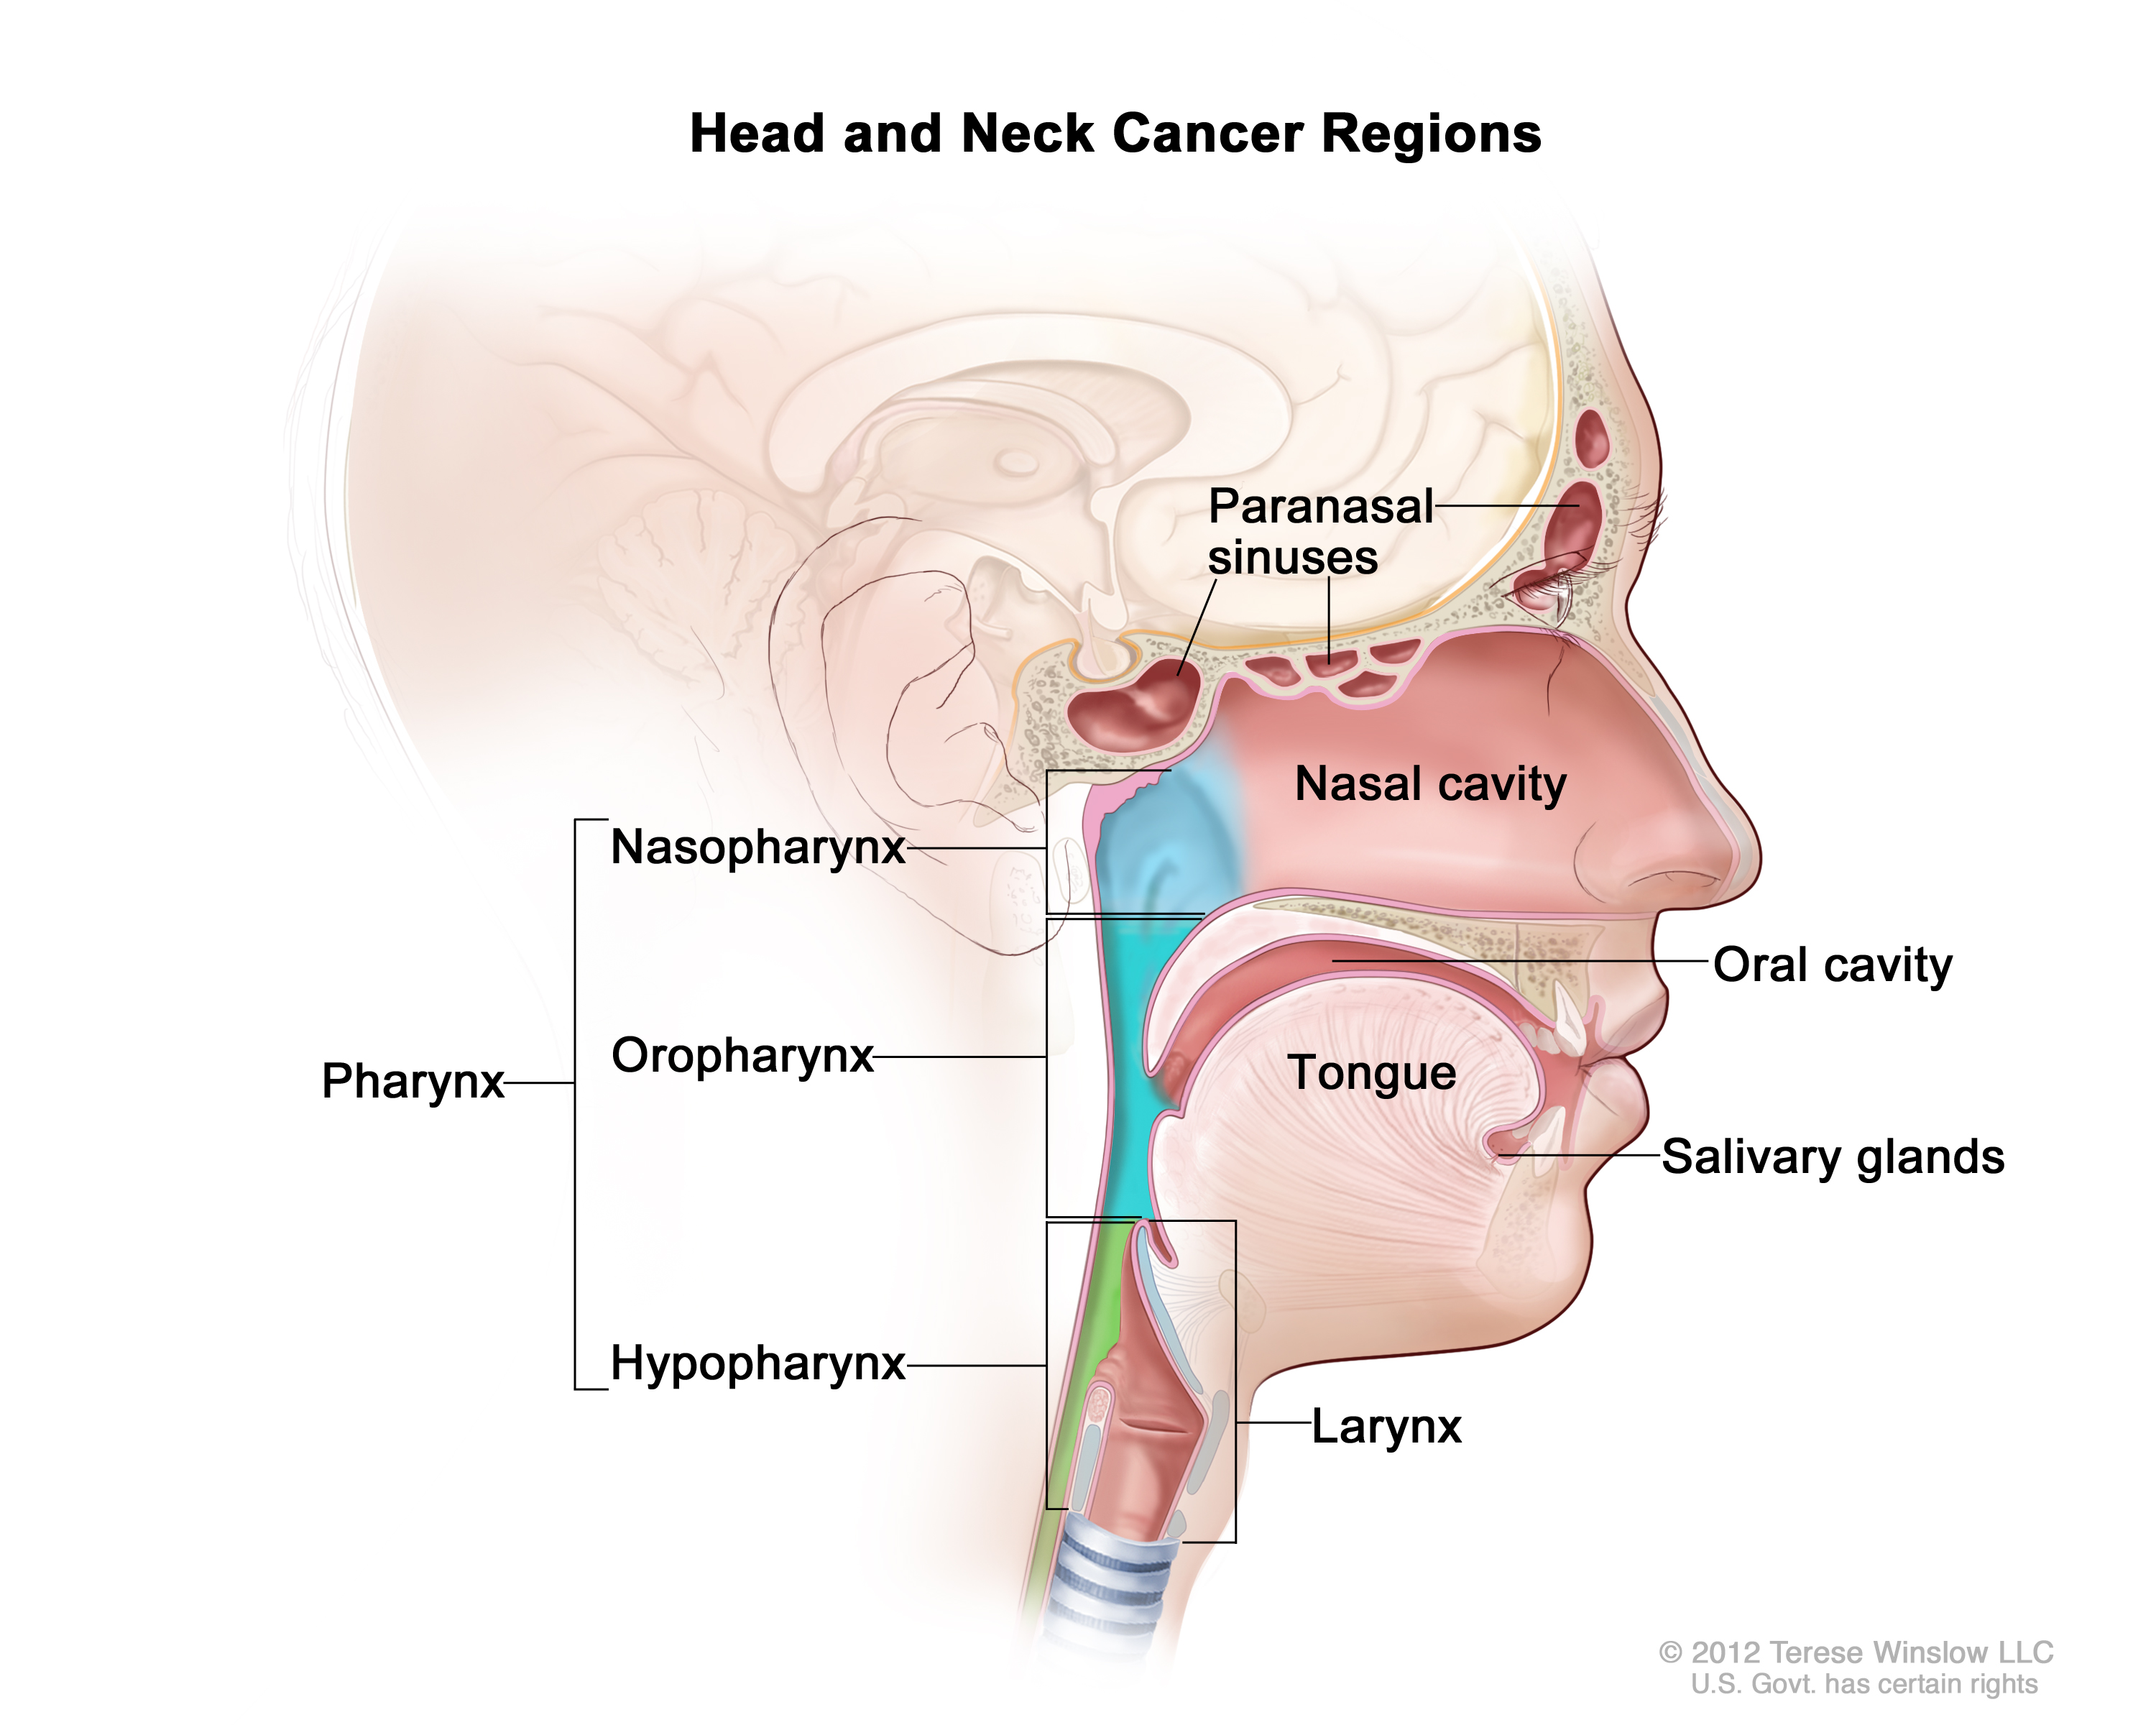 Illustration of head and neck cancer regions.